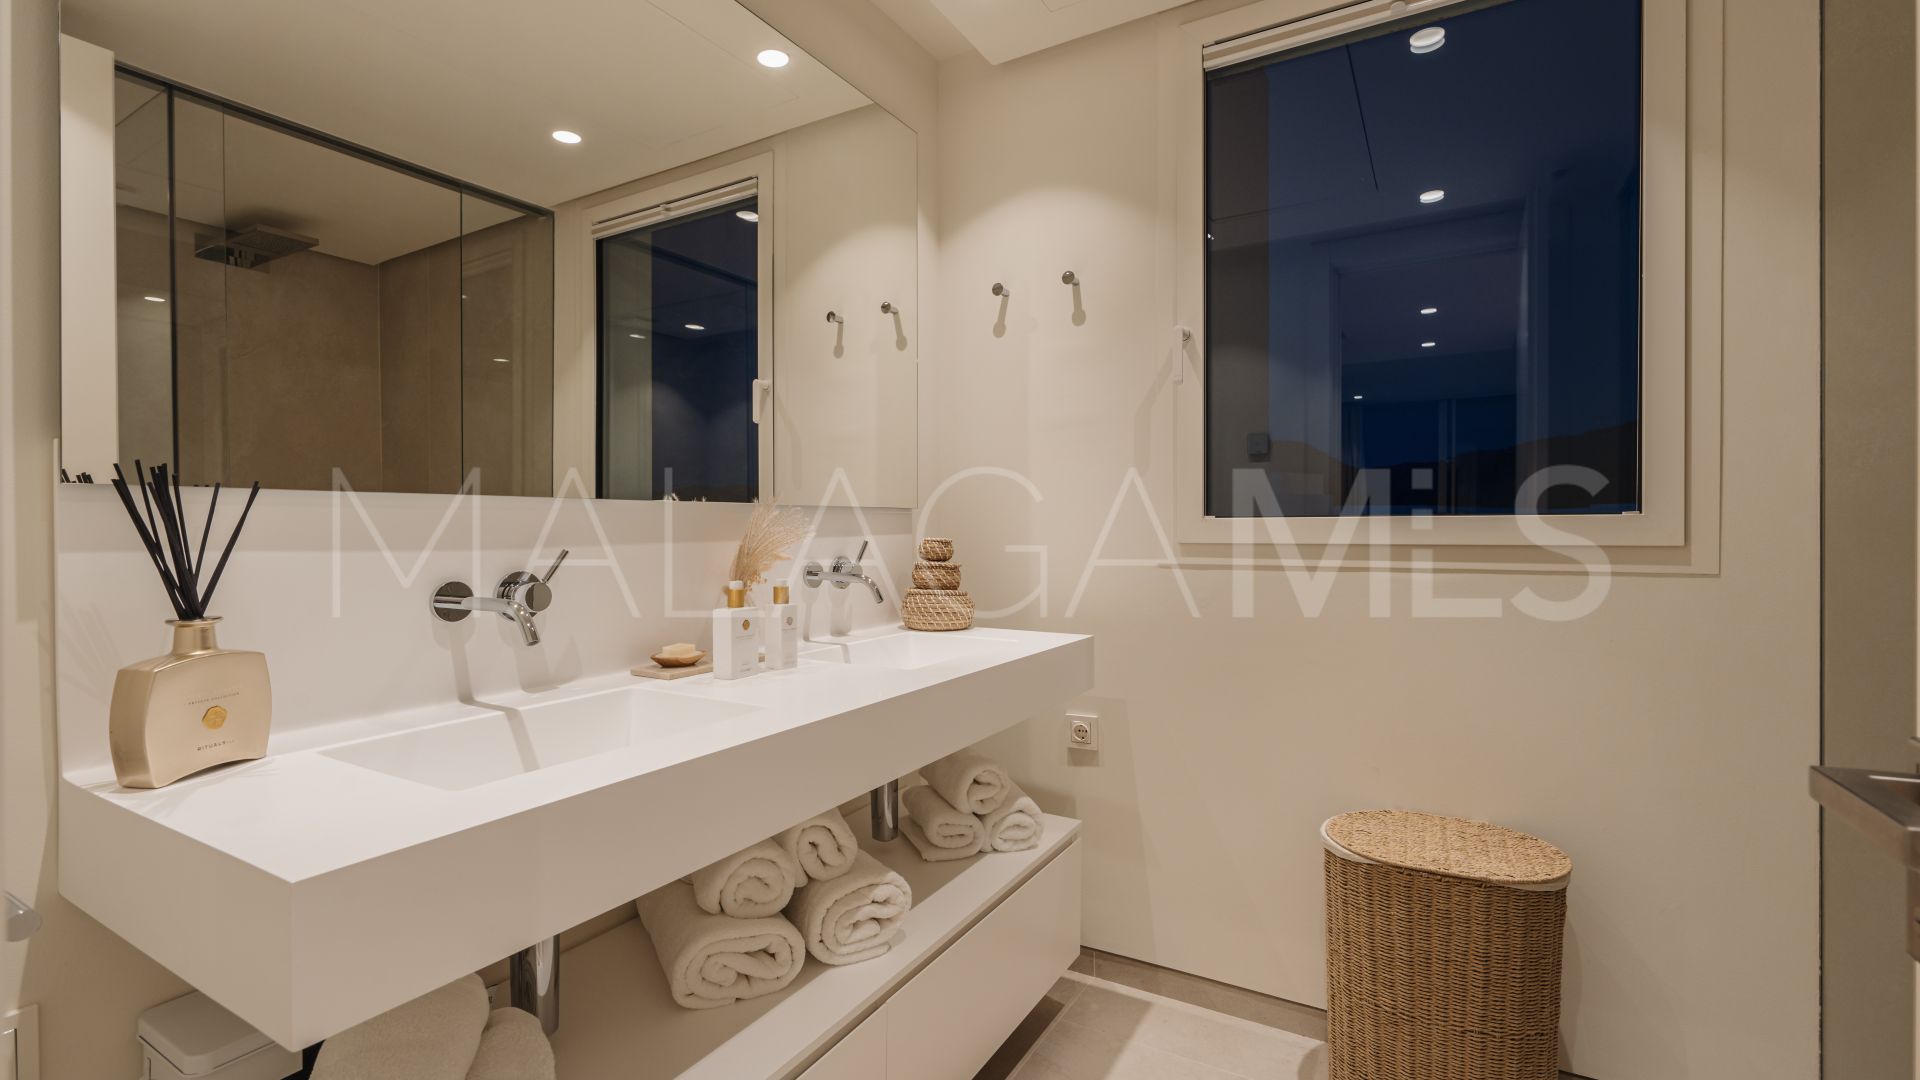 For sale duplex penthouse in Palo Alto with 3 bedrooms